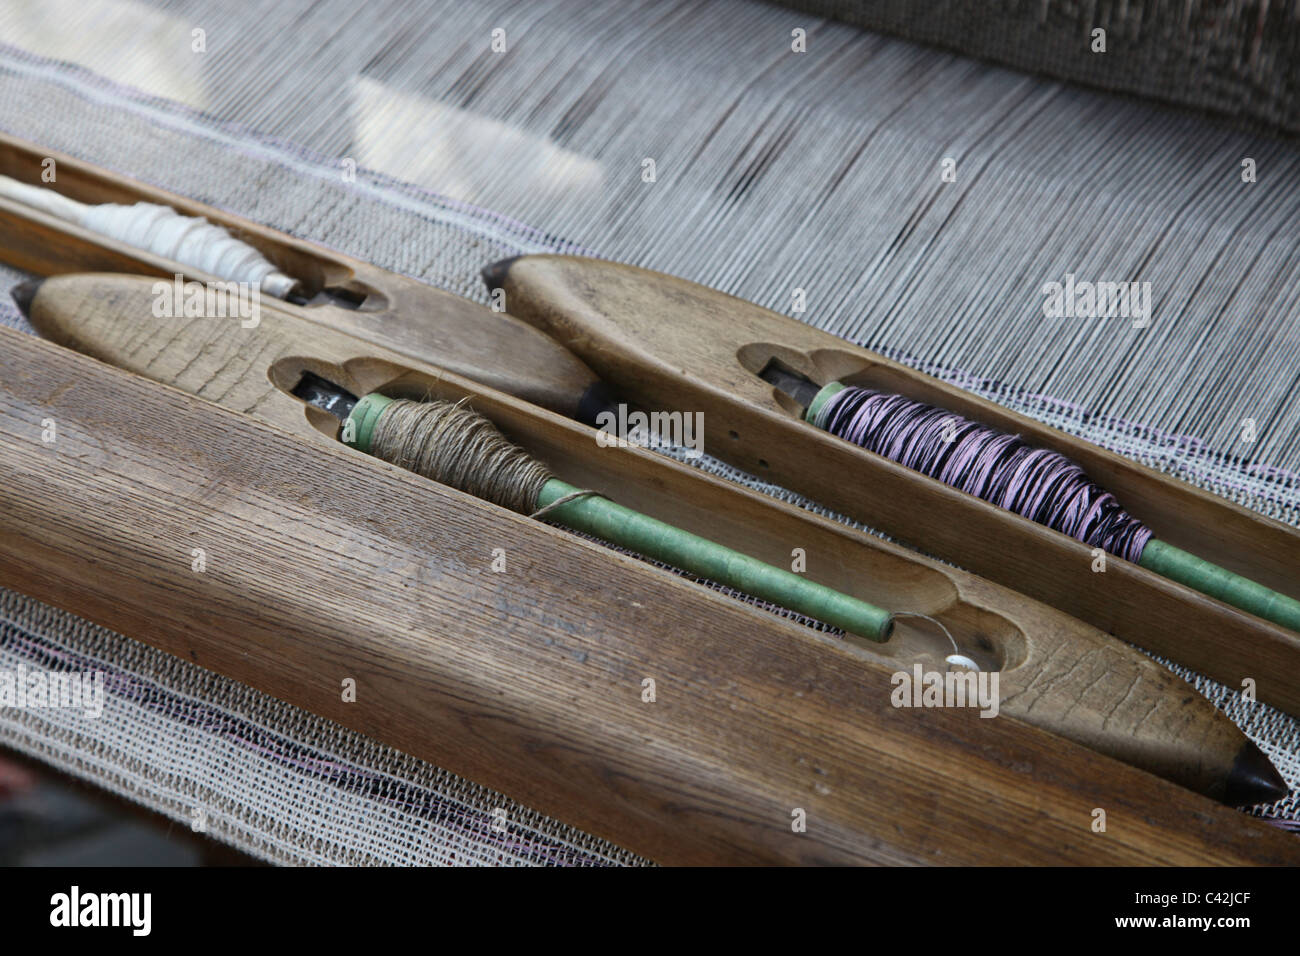 Spools of thread of an old loom Czech Stock Photo